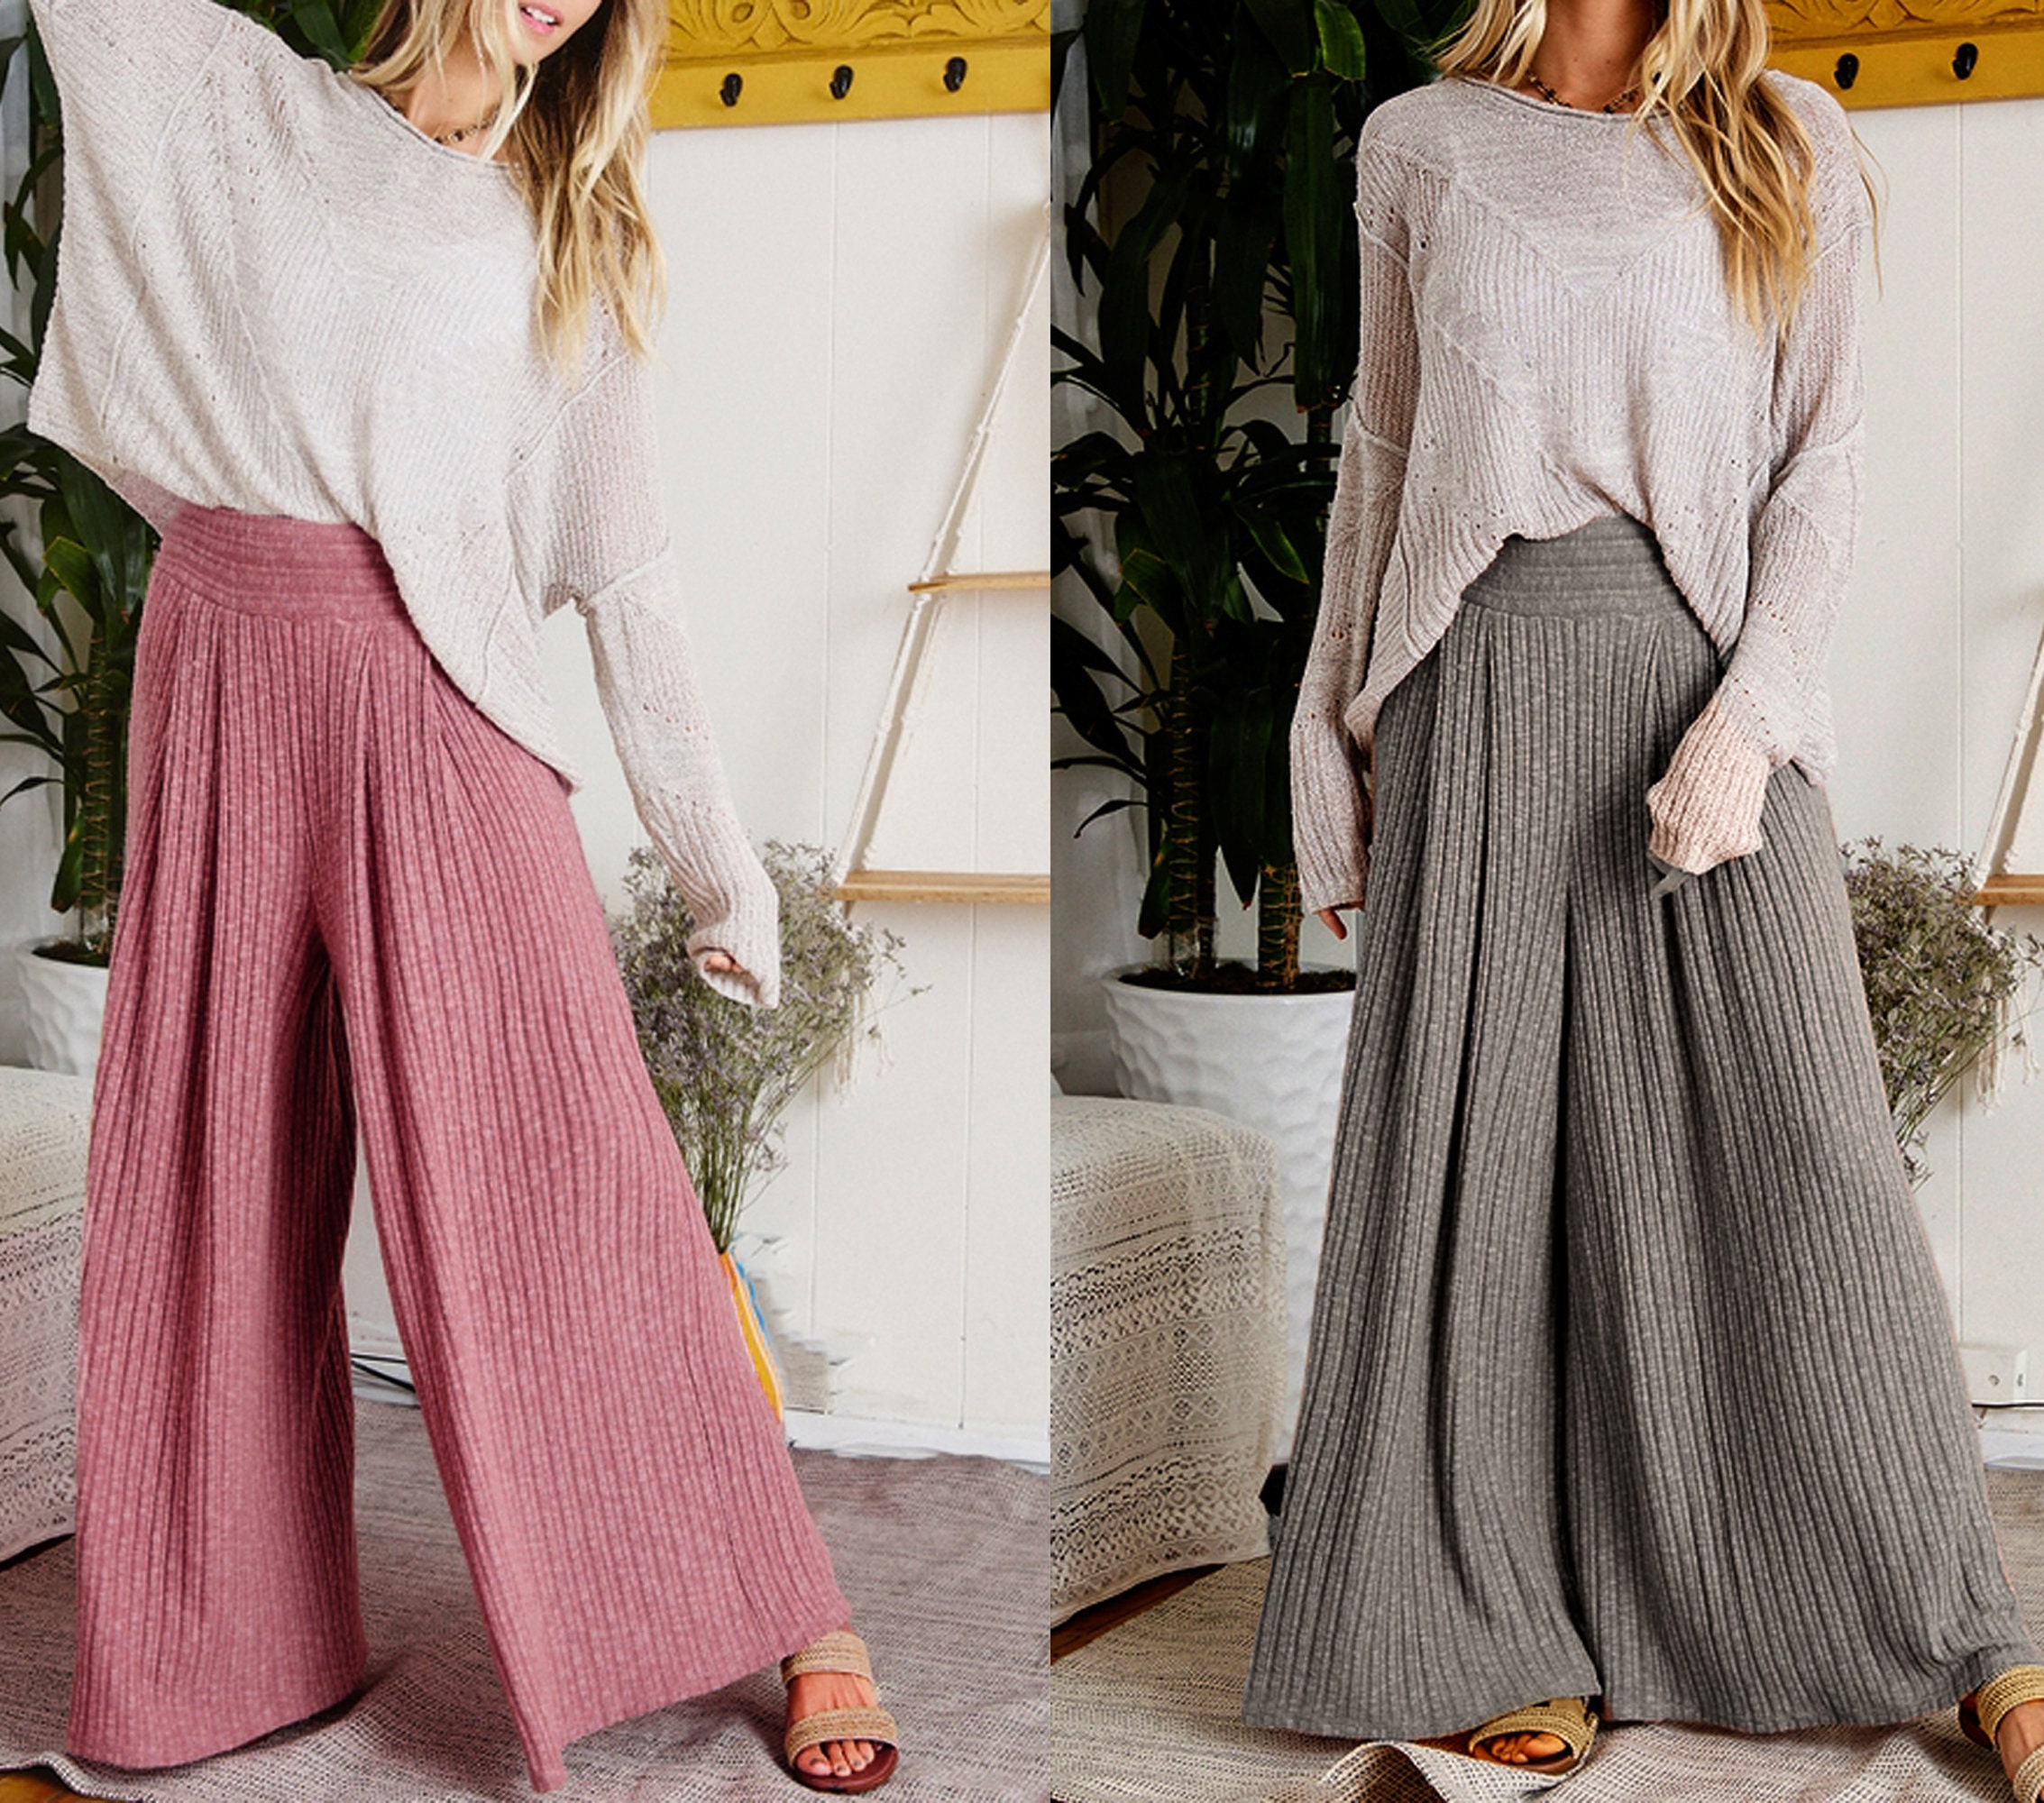 Styling Tips Of How To Wear Printed Palazzo Pants - fashionsy.com